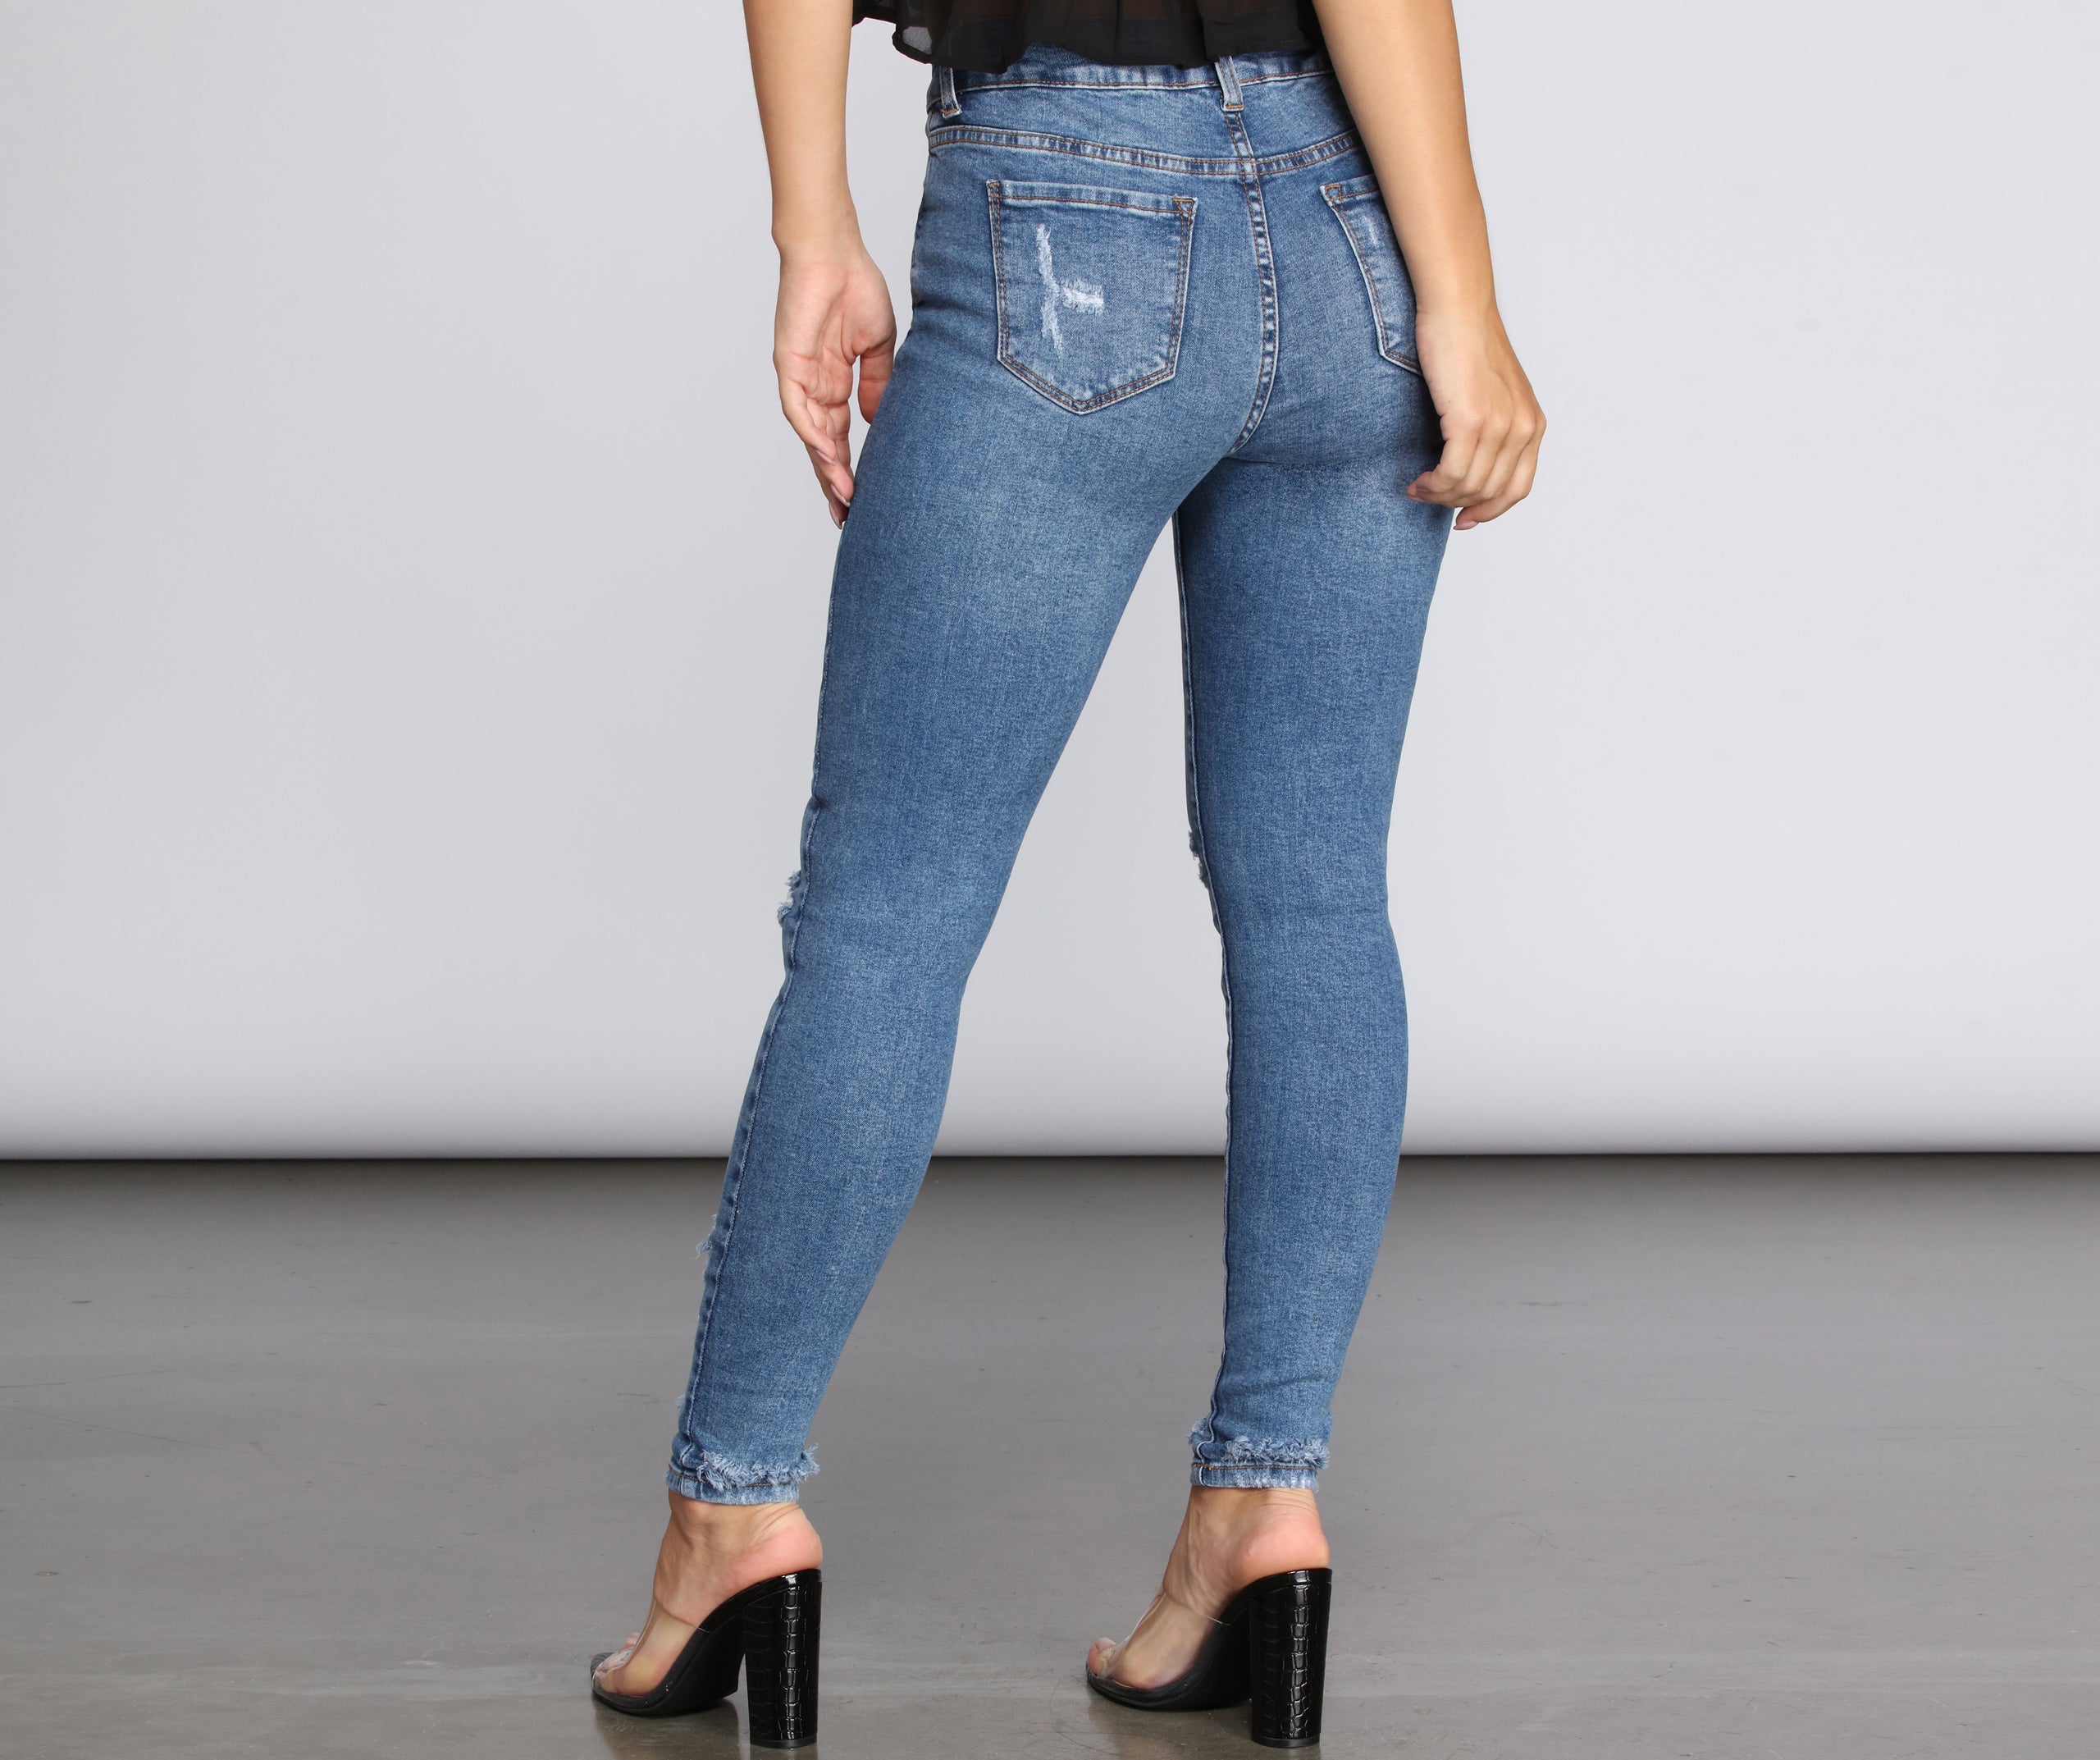 Middle Ground Distressed Skinny Jeans